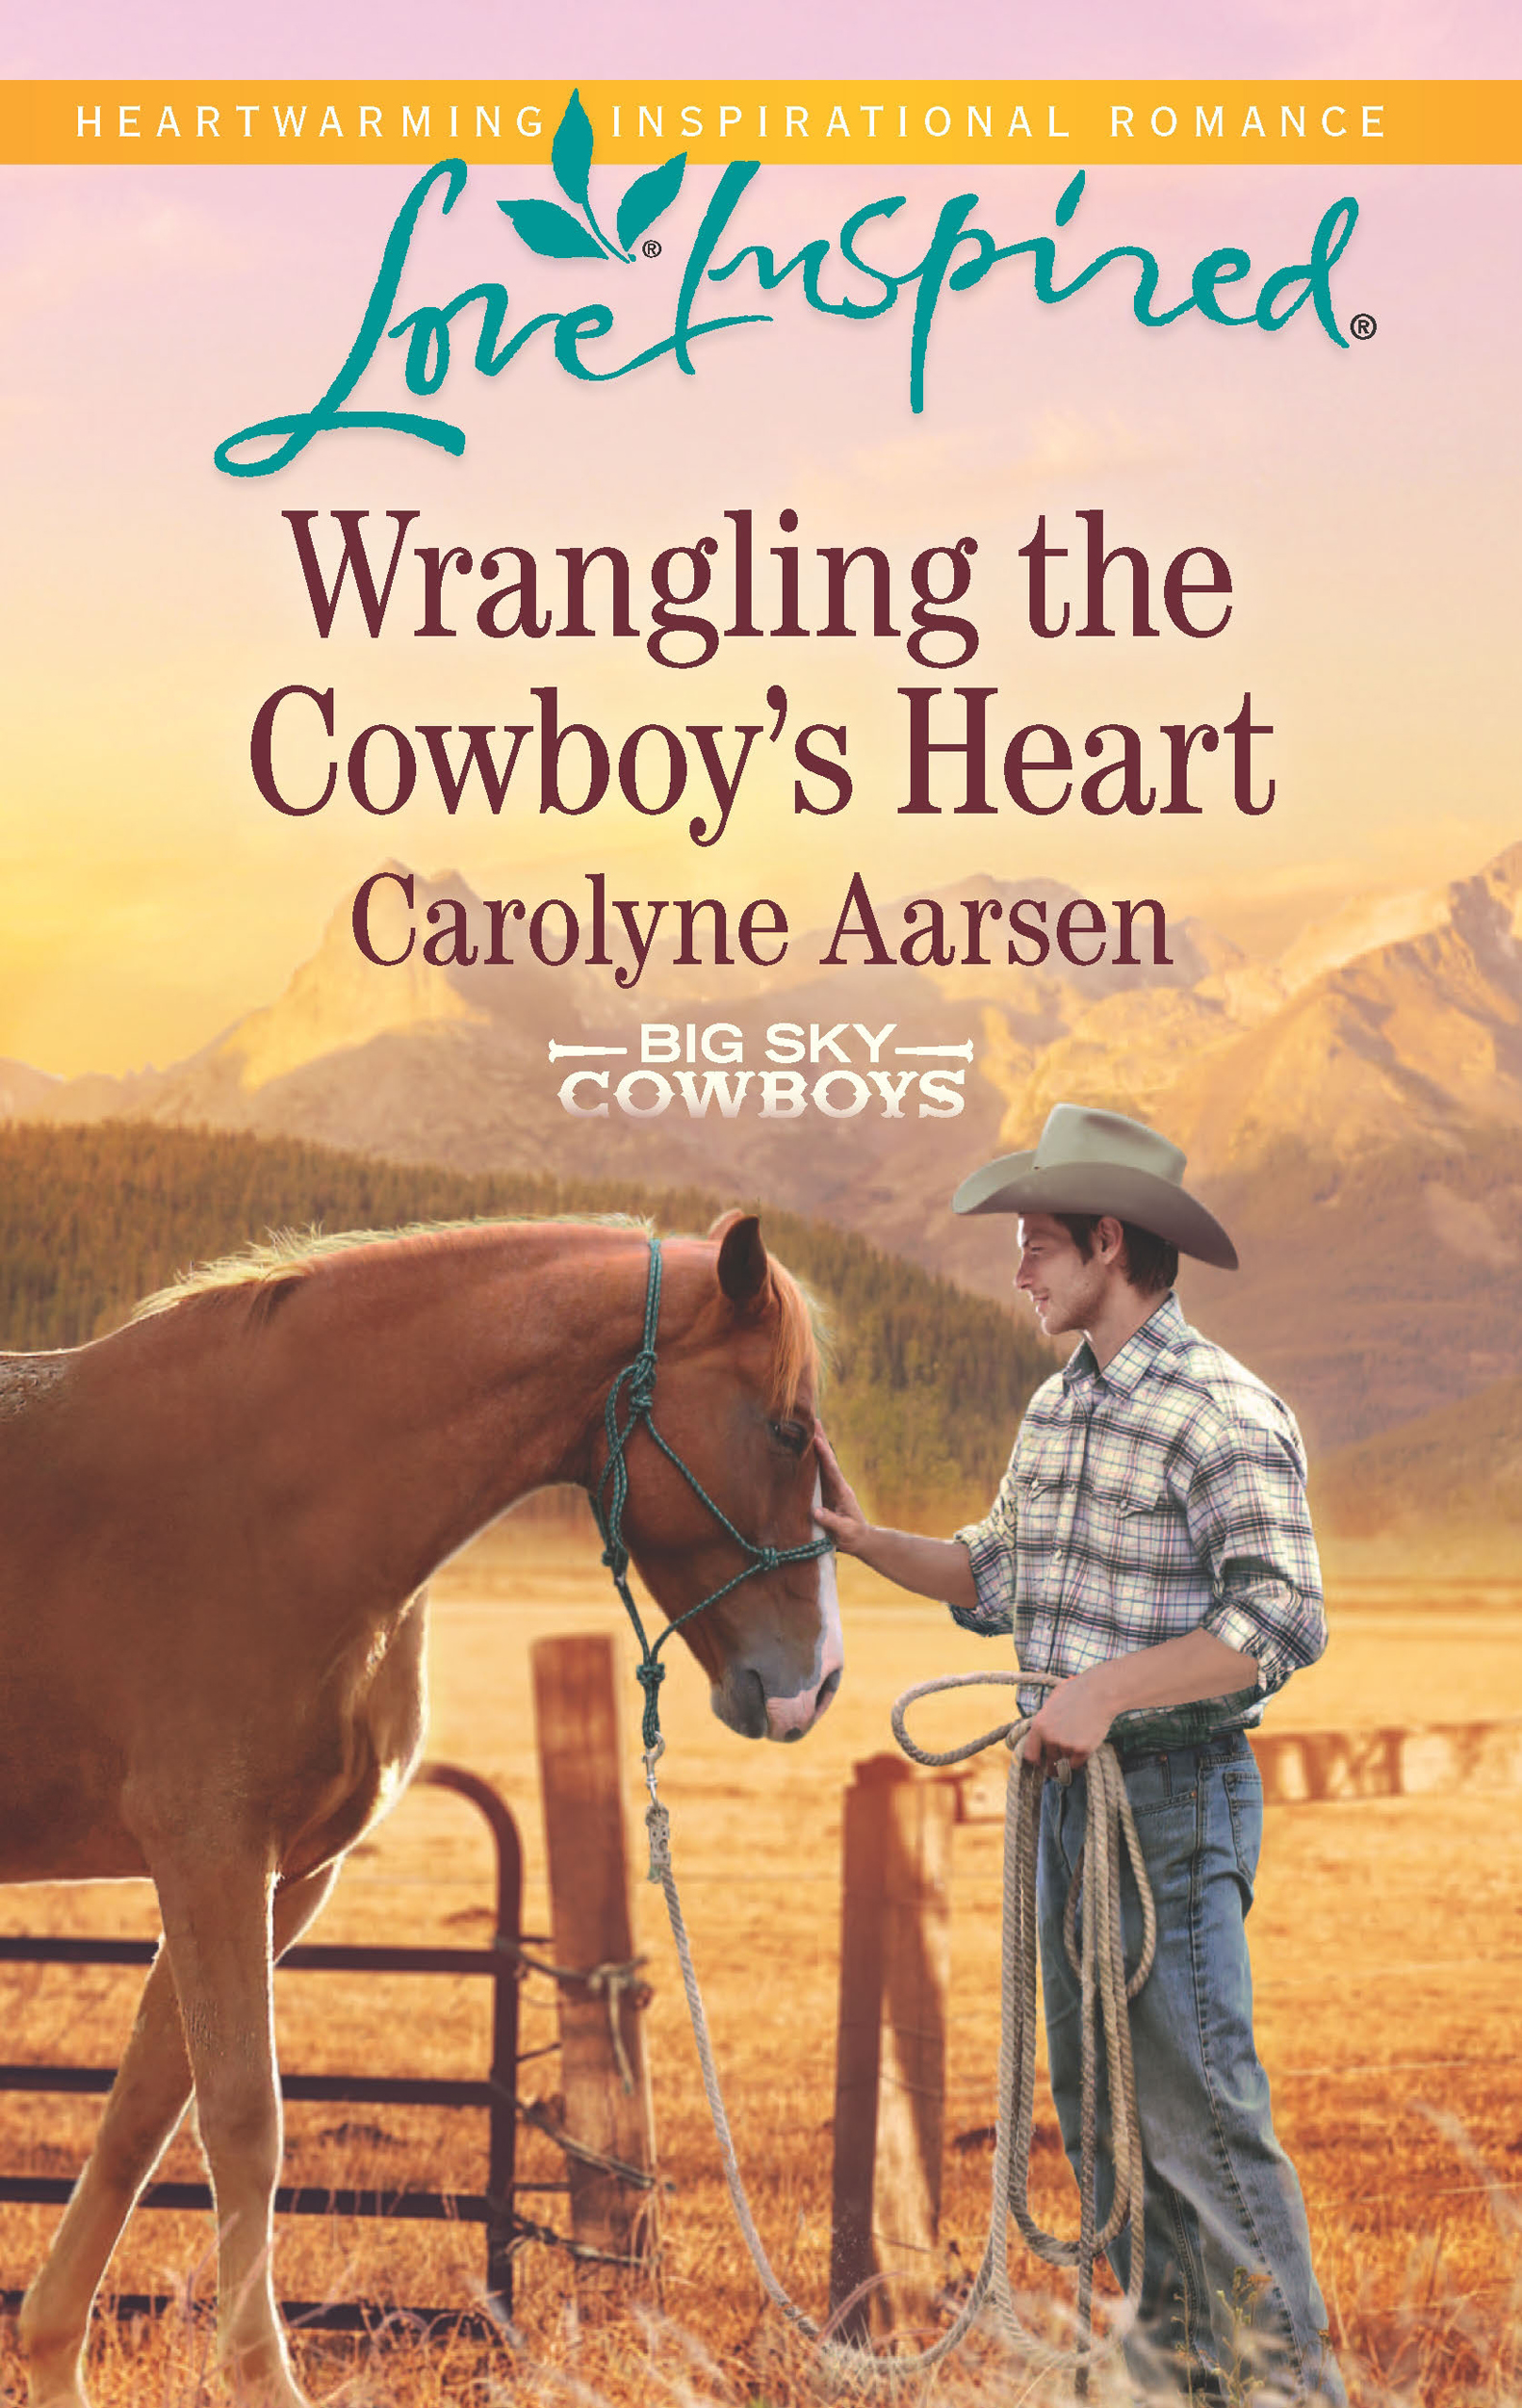 Wrangling the Cowboy's Heart (2015) by Carolyne Aarsen